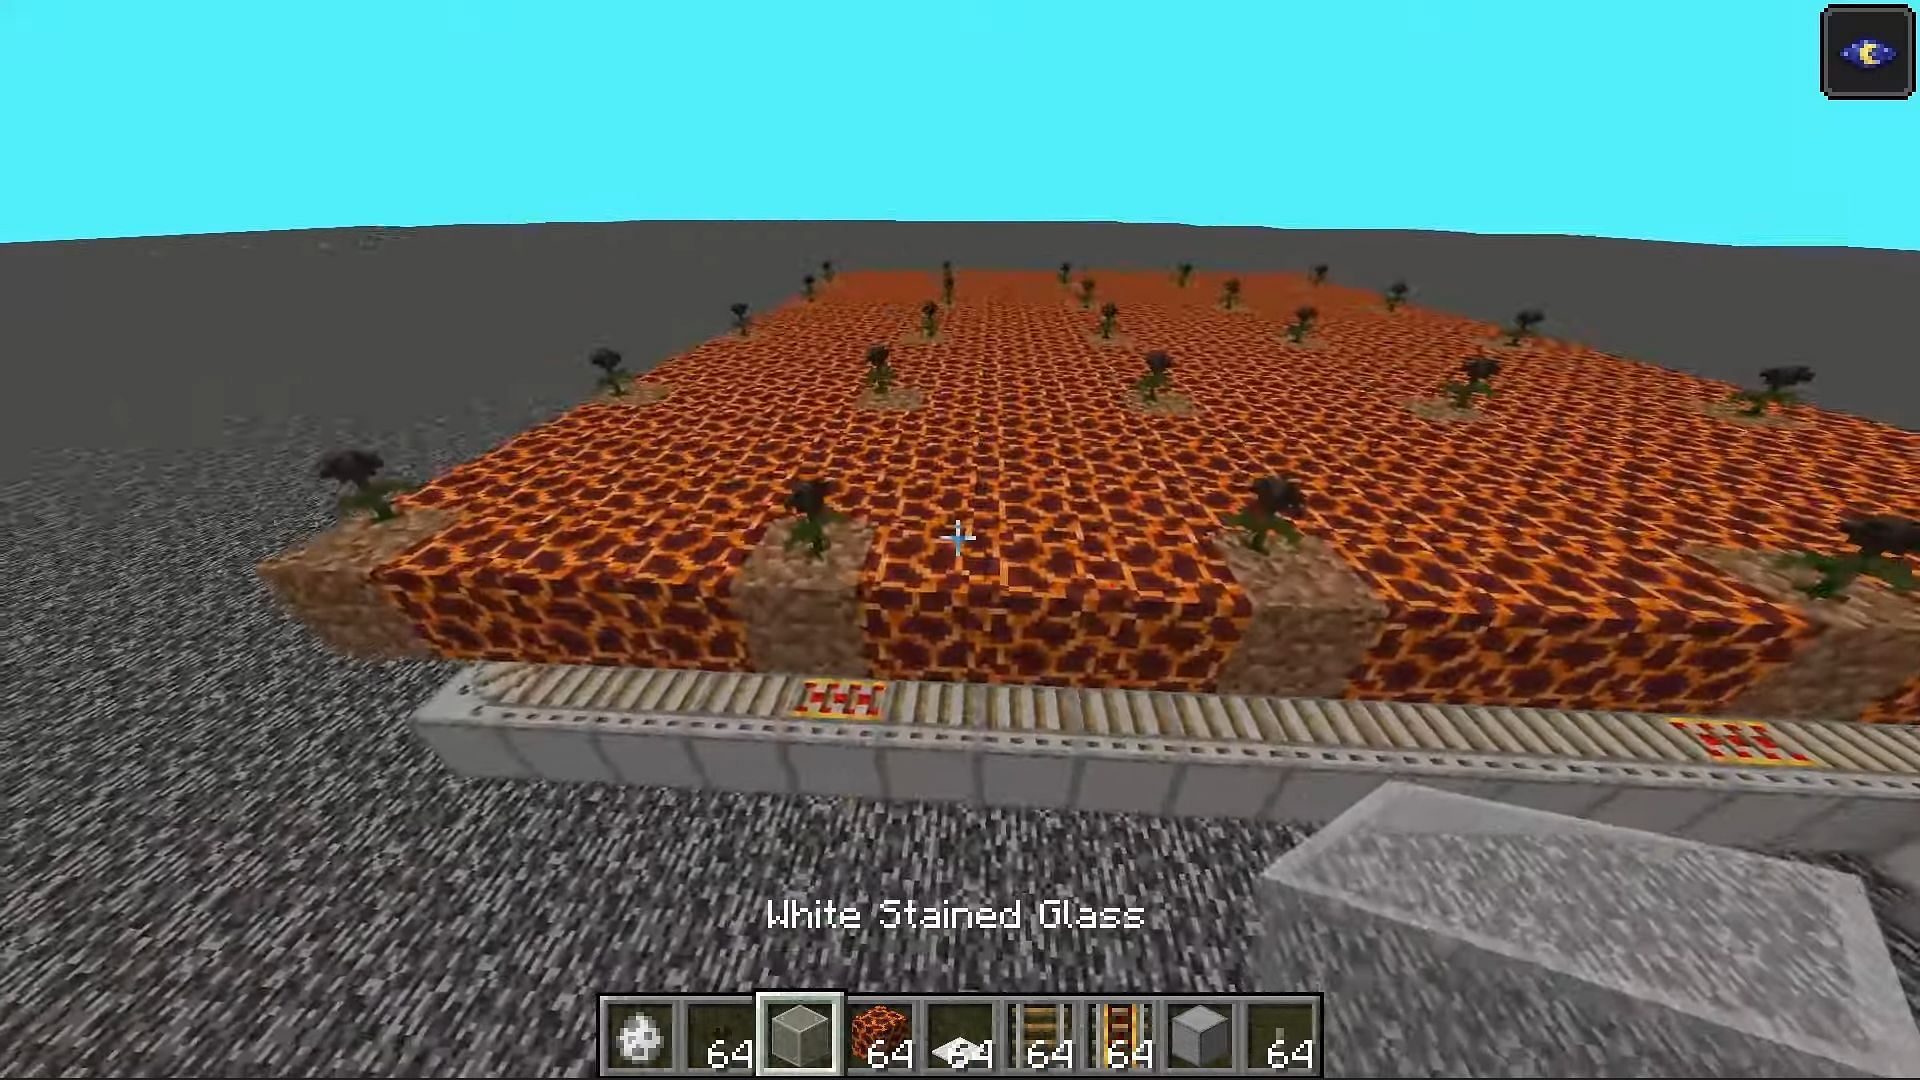 Wither roses occasionally placed to damage the mob (Image via EasyGoingMC/YouTube)